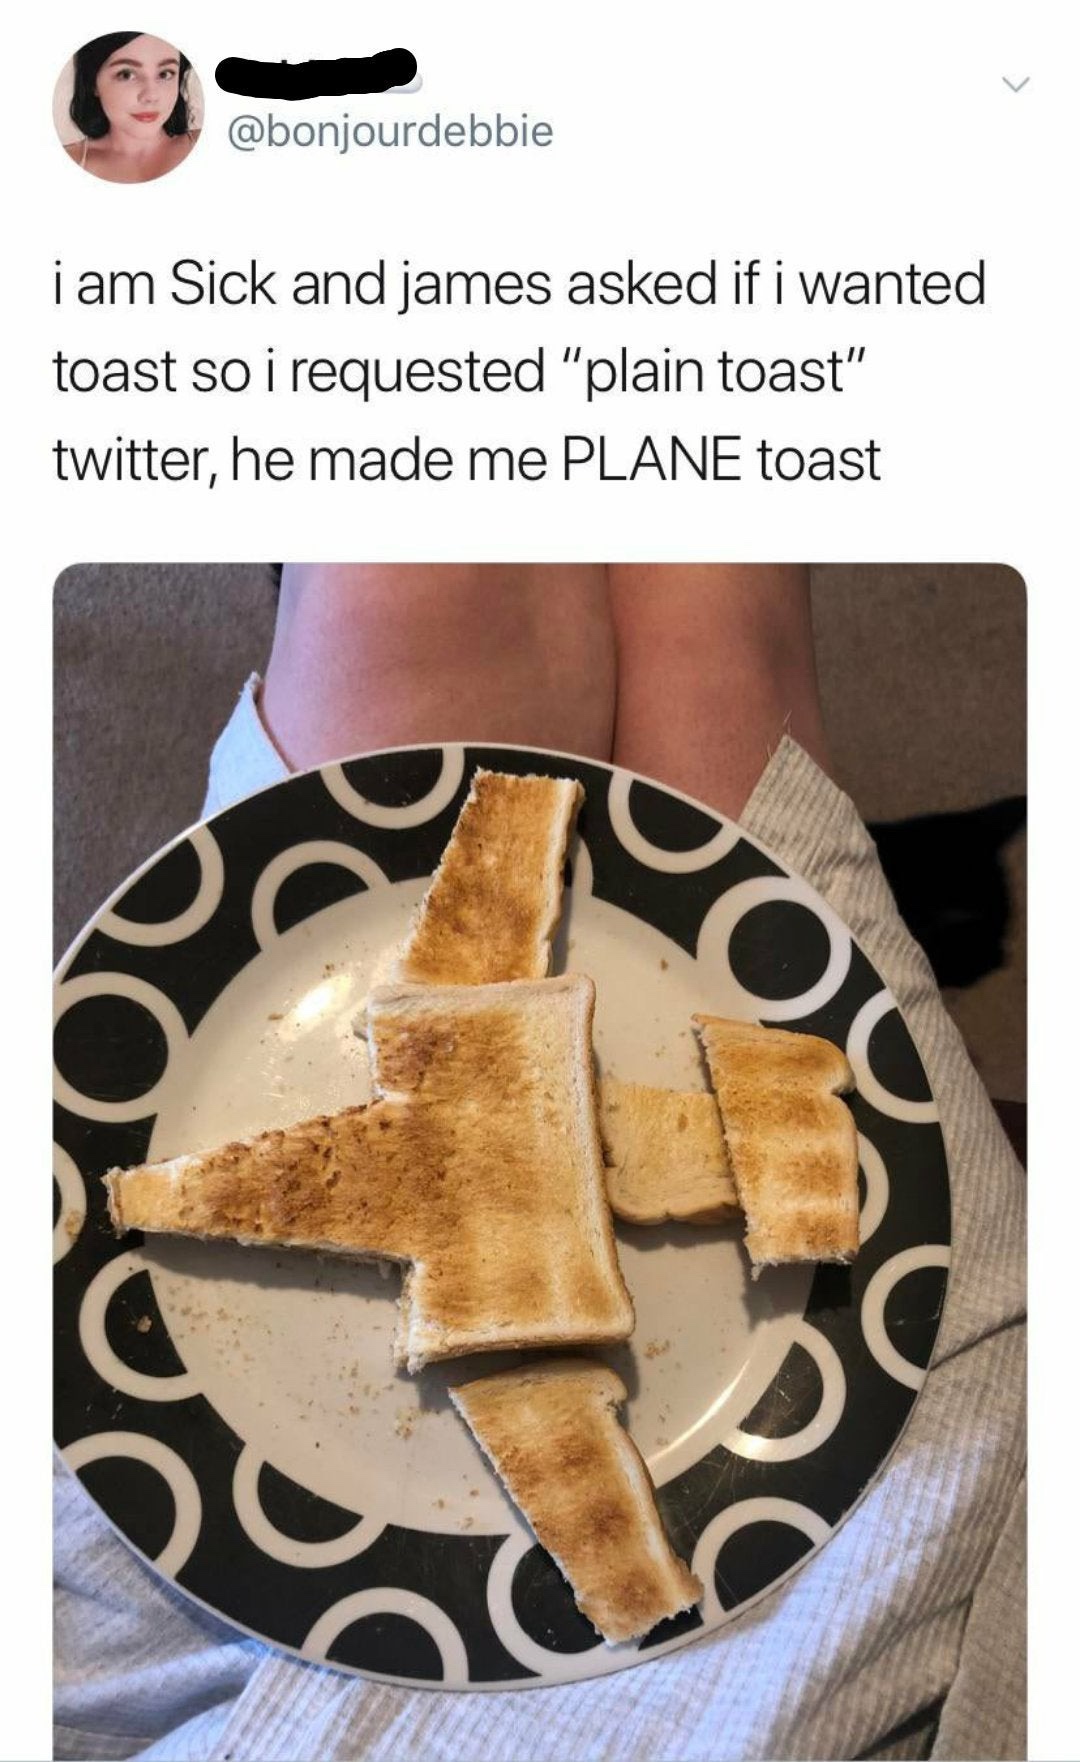 Meme - i am sick and james asked if i wanted toast so i requested "plain toast" twitter, he made me Plane toast